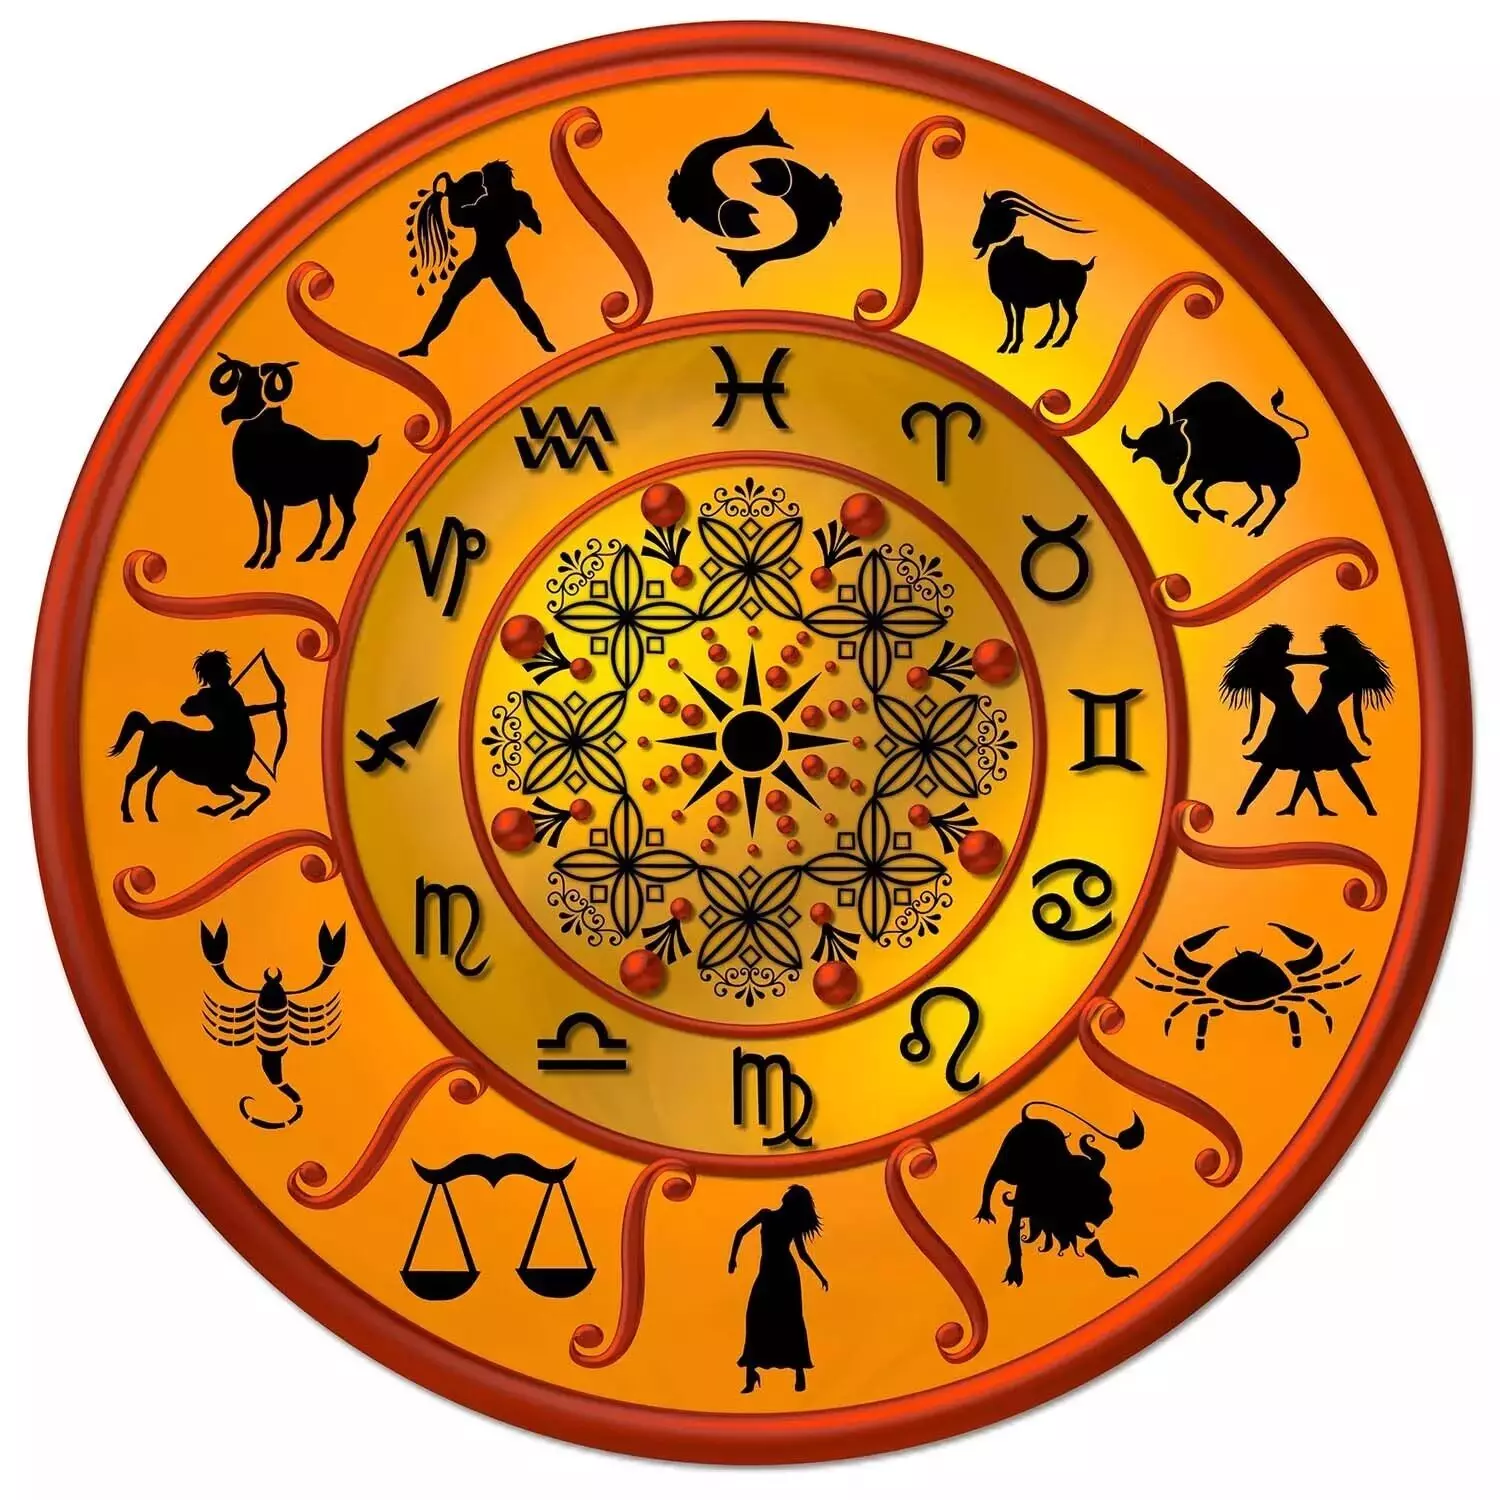 03 December   – Know your todays horoscope